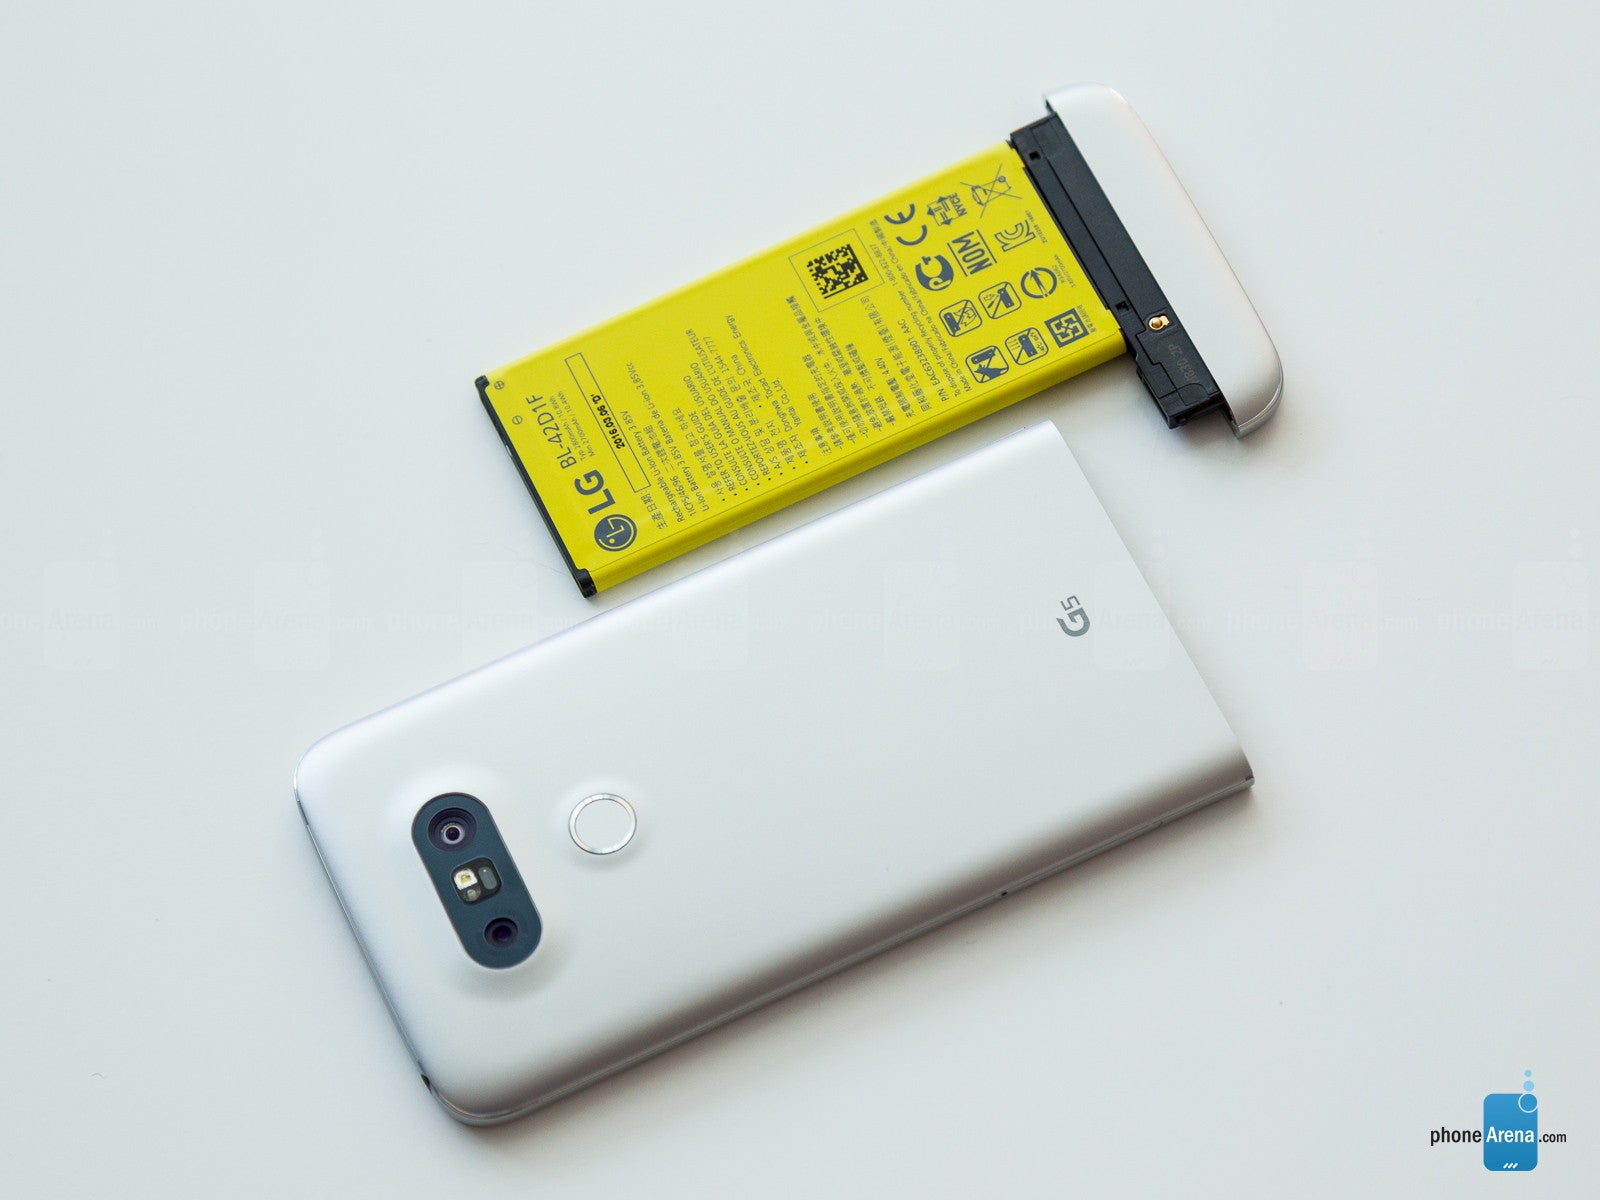 With its removable battery, the LG G5 is just the right flagship for the occasion. - Did you know – removing your phone's battery is the only sure way to prevent it from being tracked